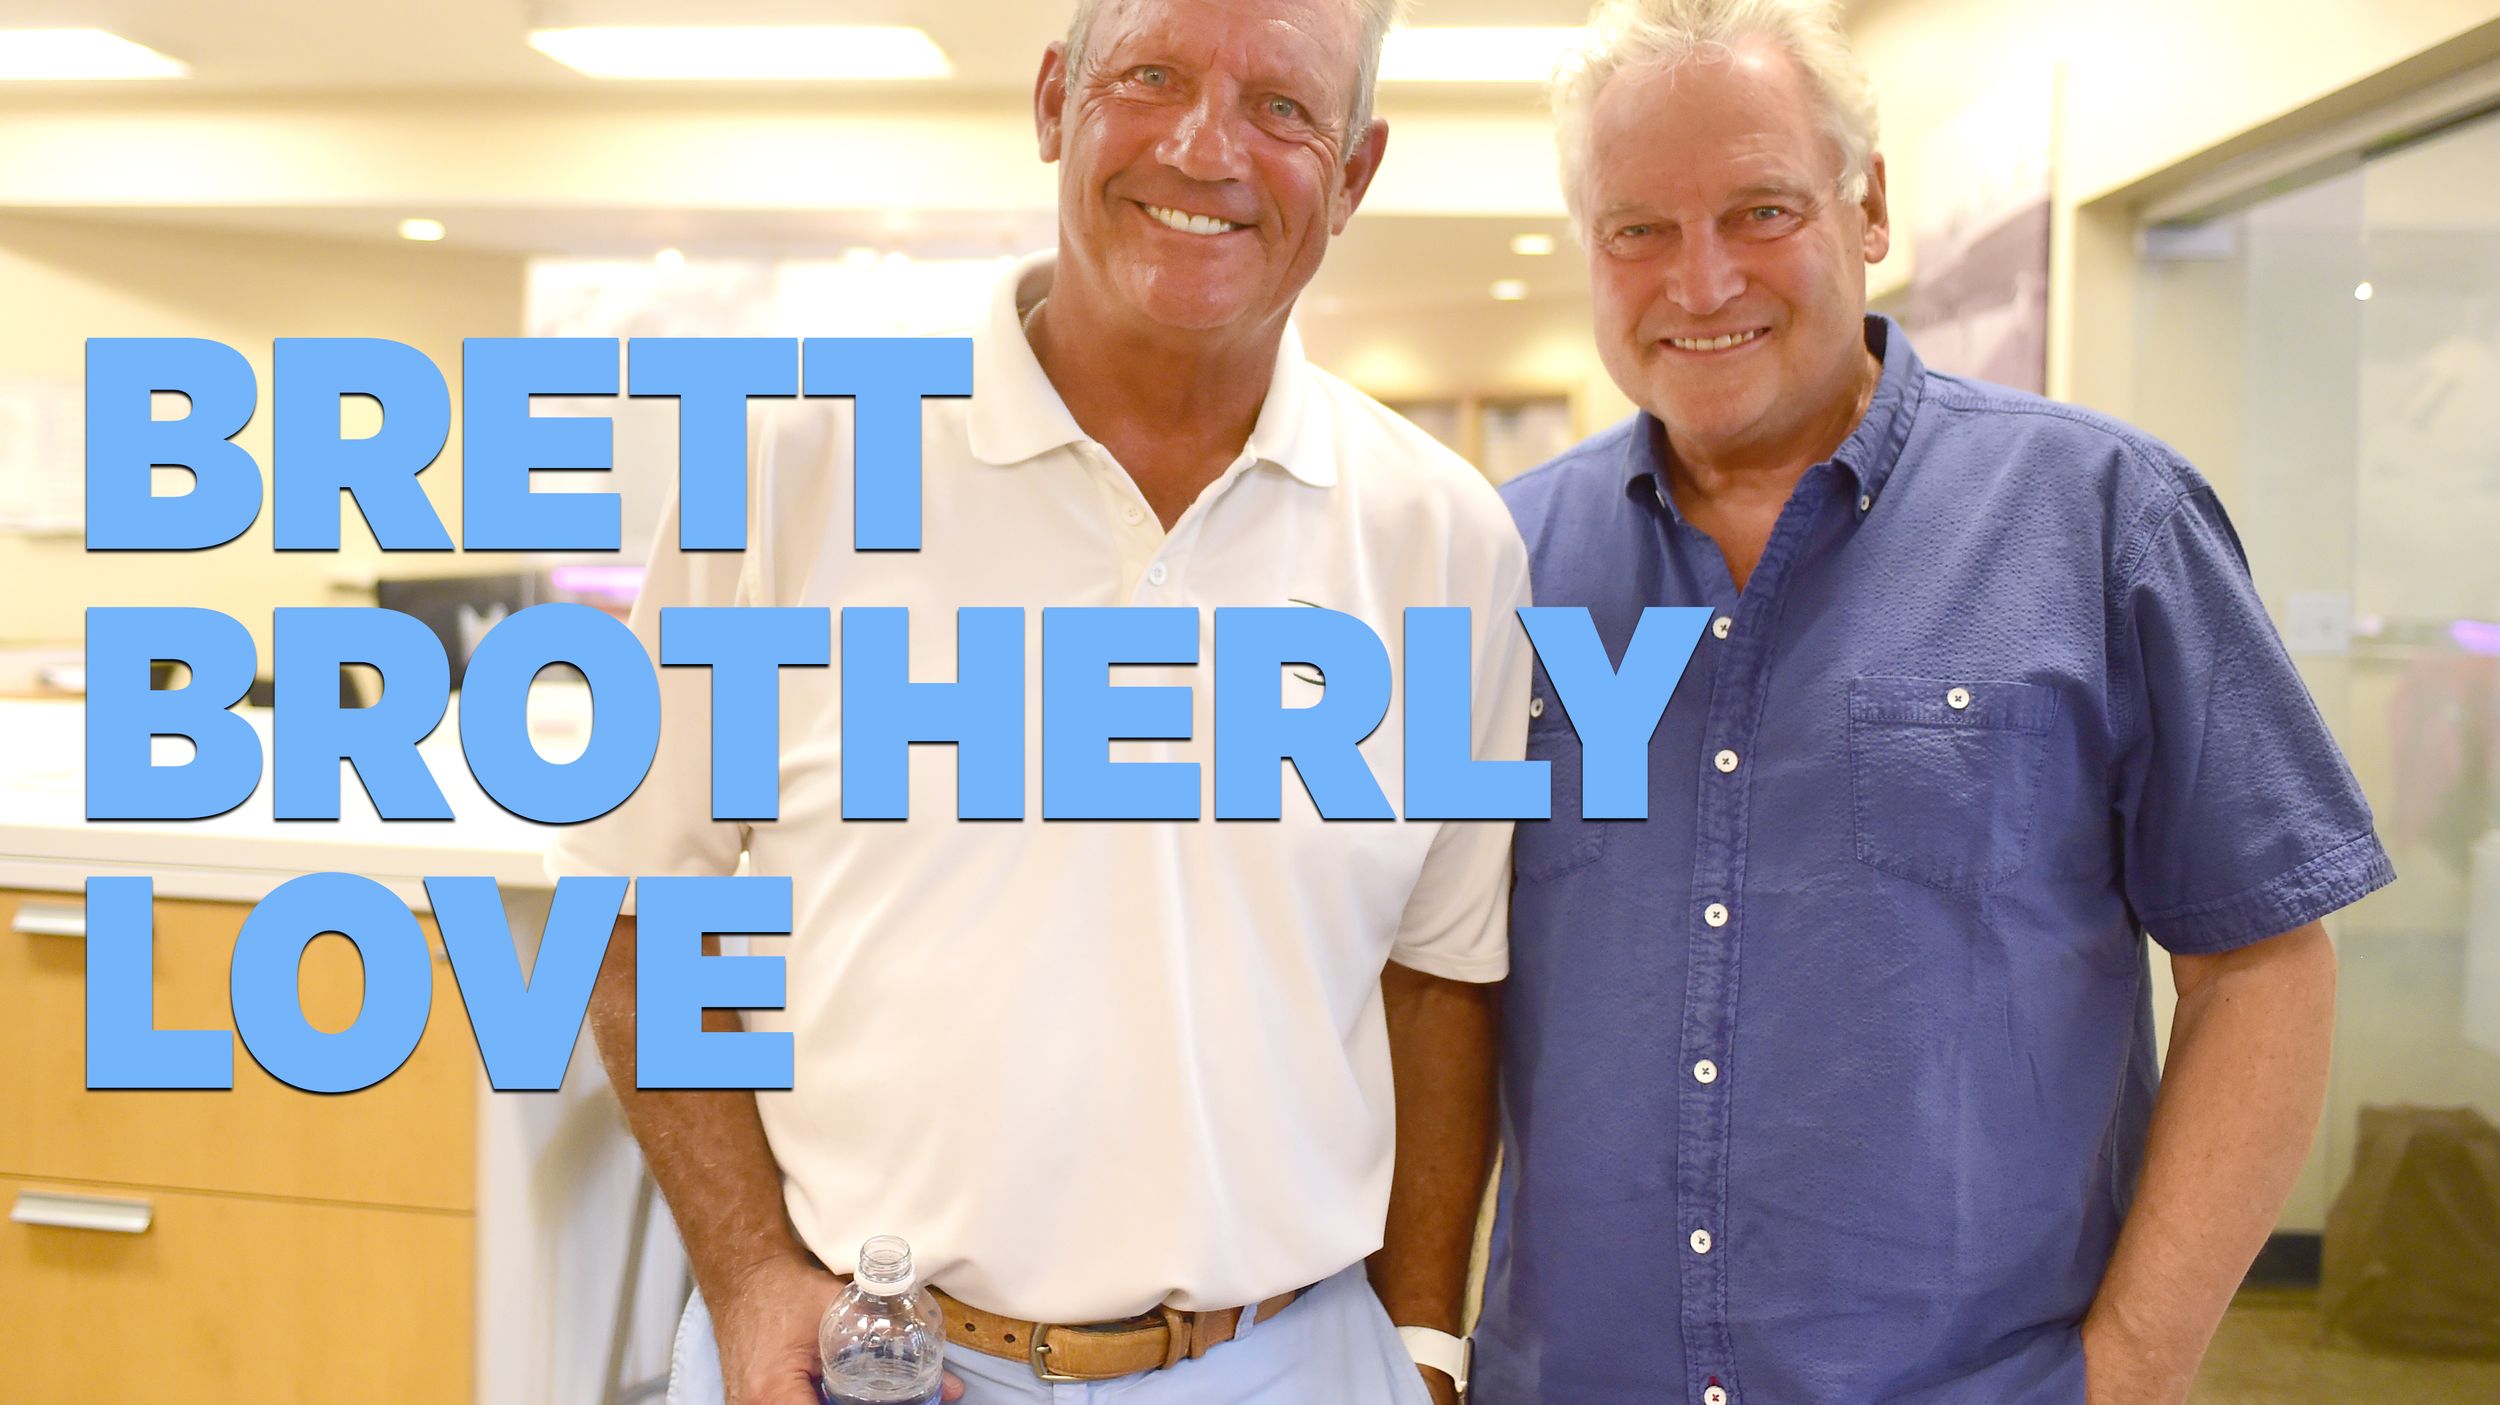 George Brett and his brothers share a love for Spokane and Spokane